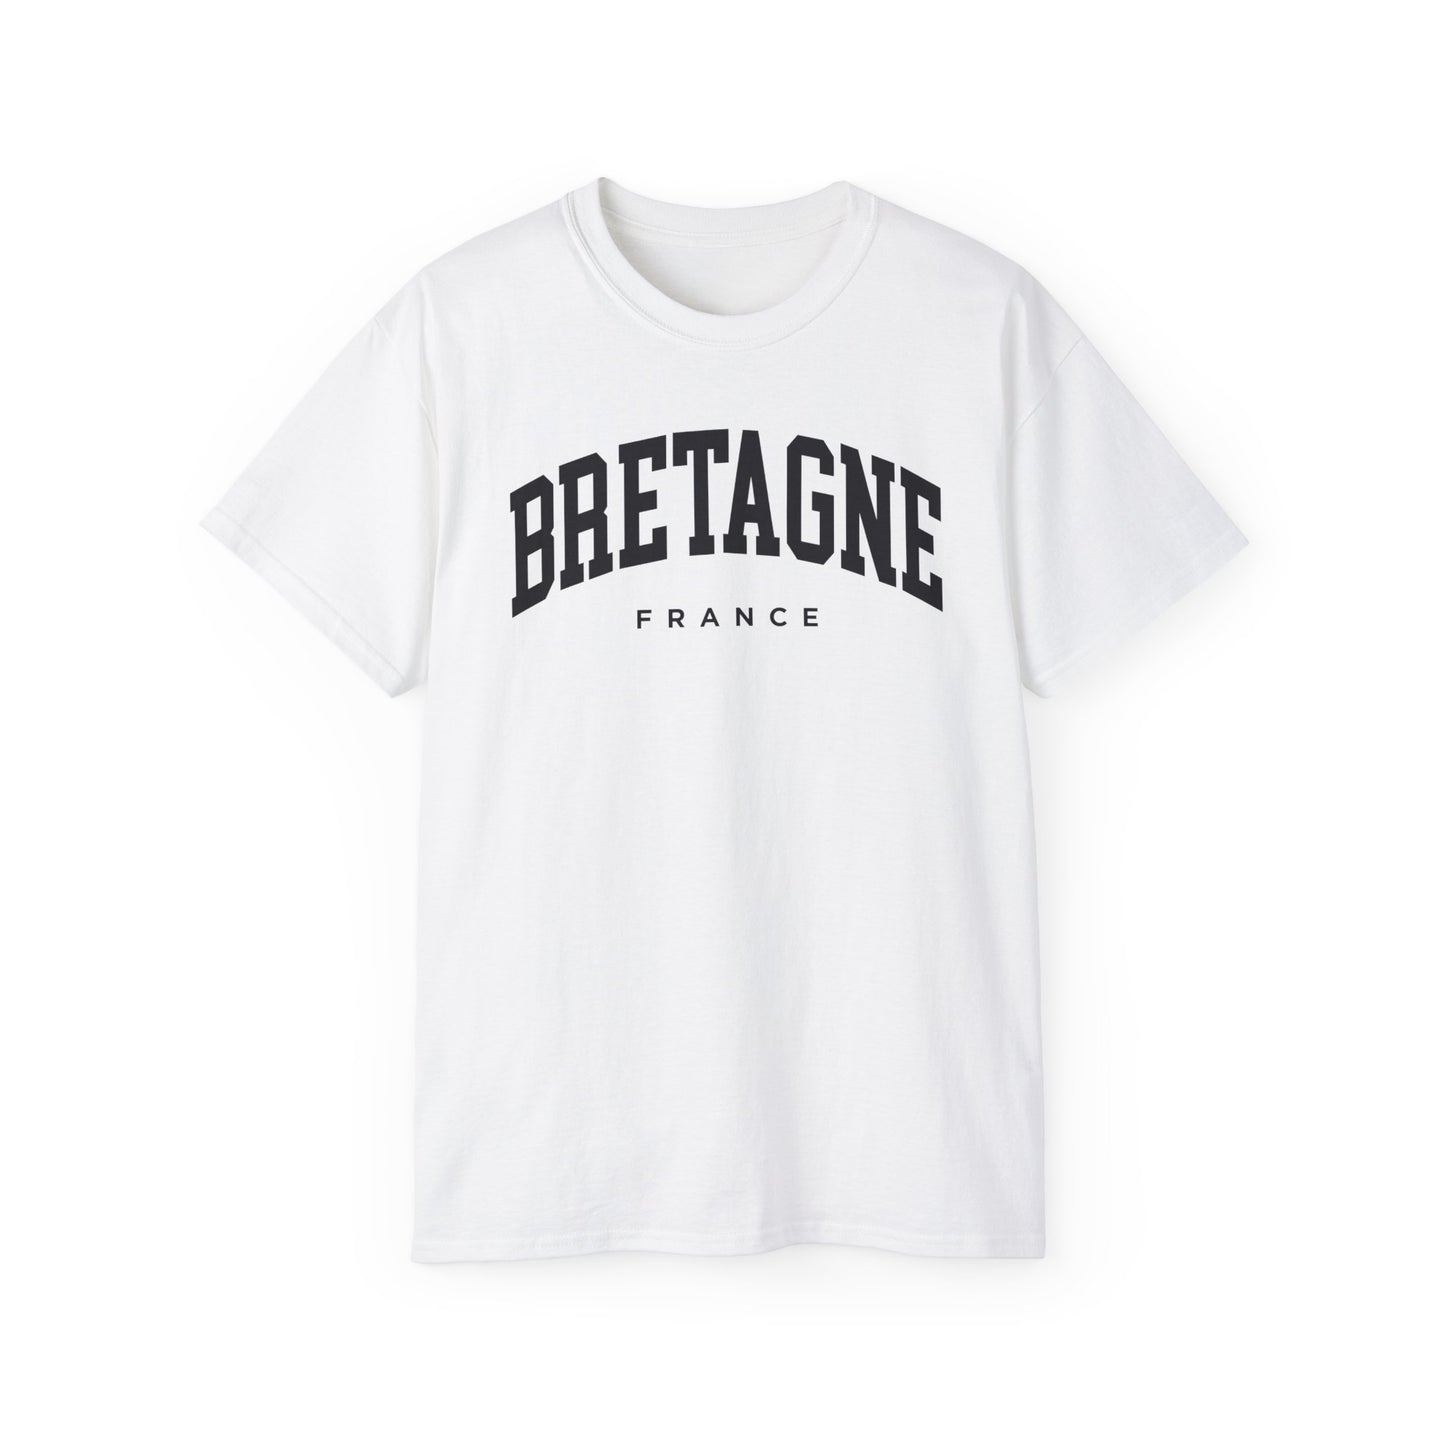 Brittany France Tee